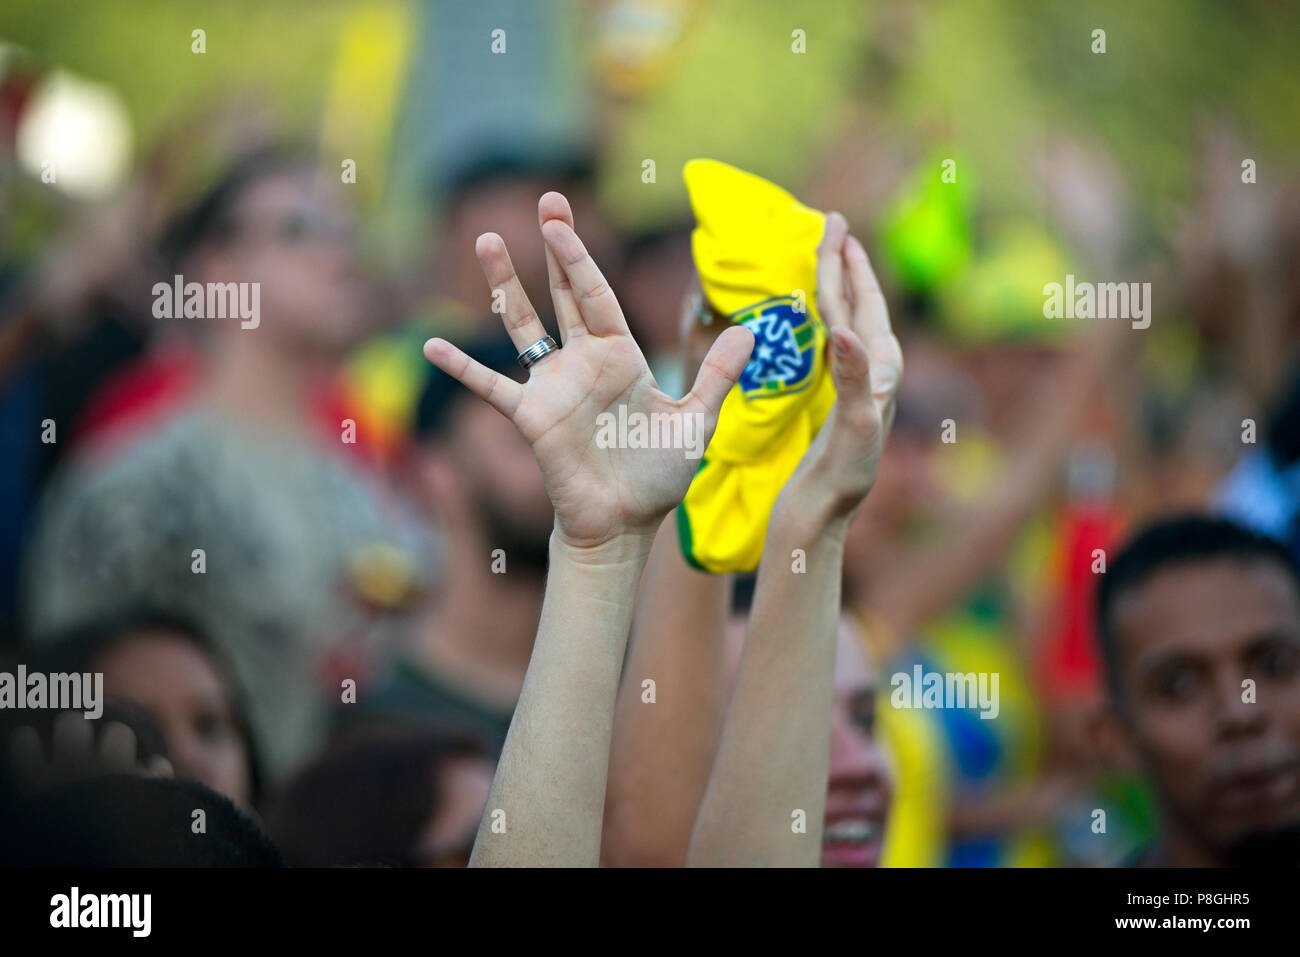 World Cup - July 6, 2018:  A Brazilian fan crosses her fingers during the match between Brazil and Belgium at a public event in Rio de Janeiro Stock Photo